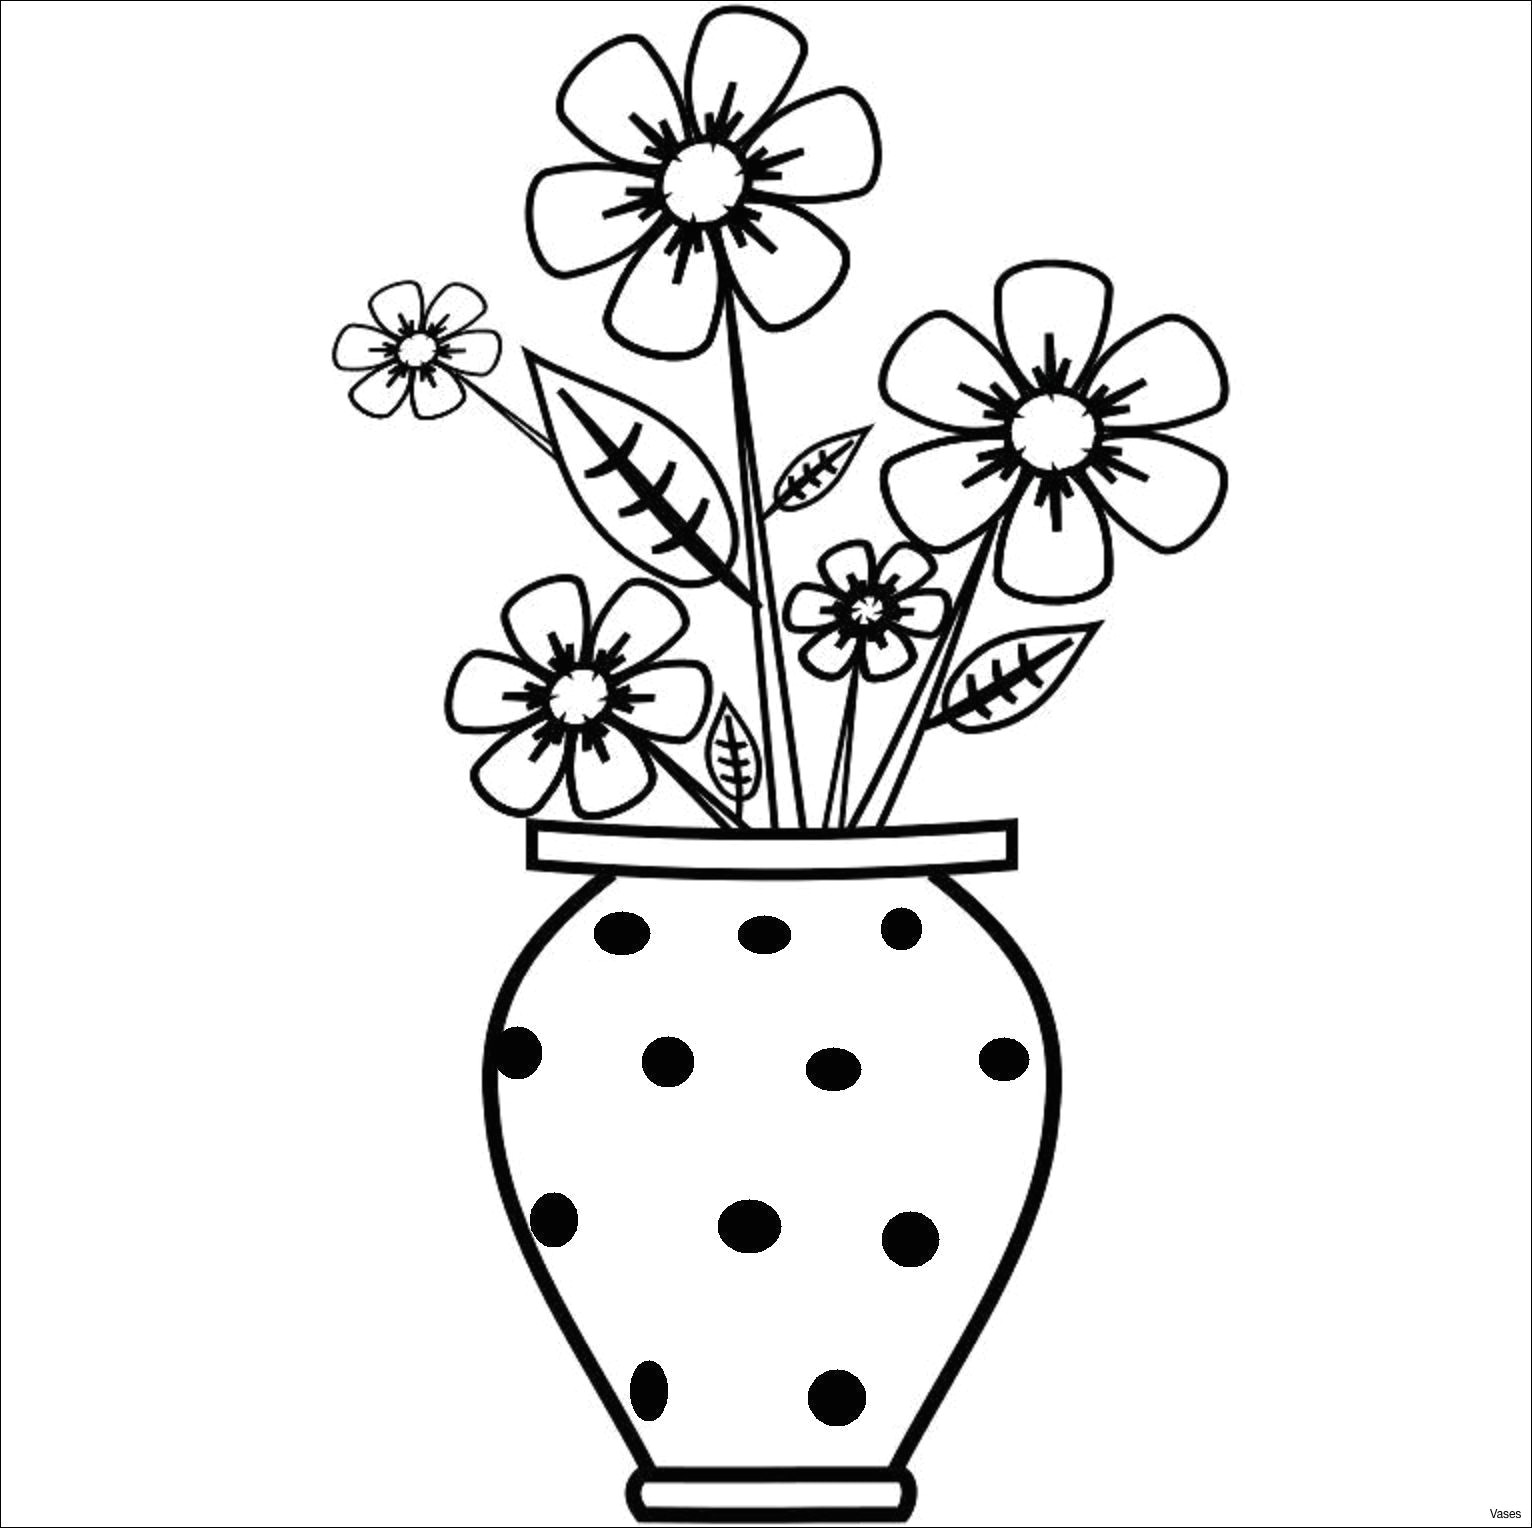 Easy Drawings with Lines Images Of Easy Drawings Vase Art Drawings How to Draw A Vase Step 2h